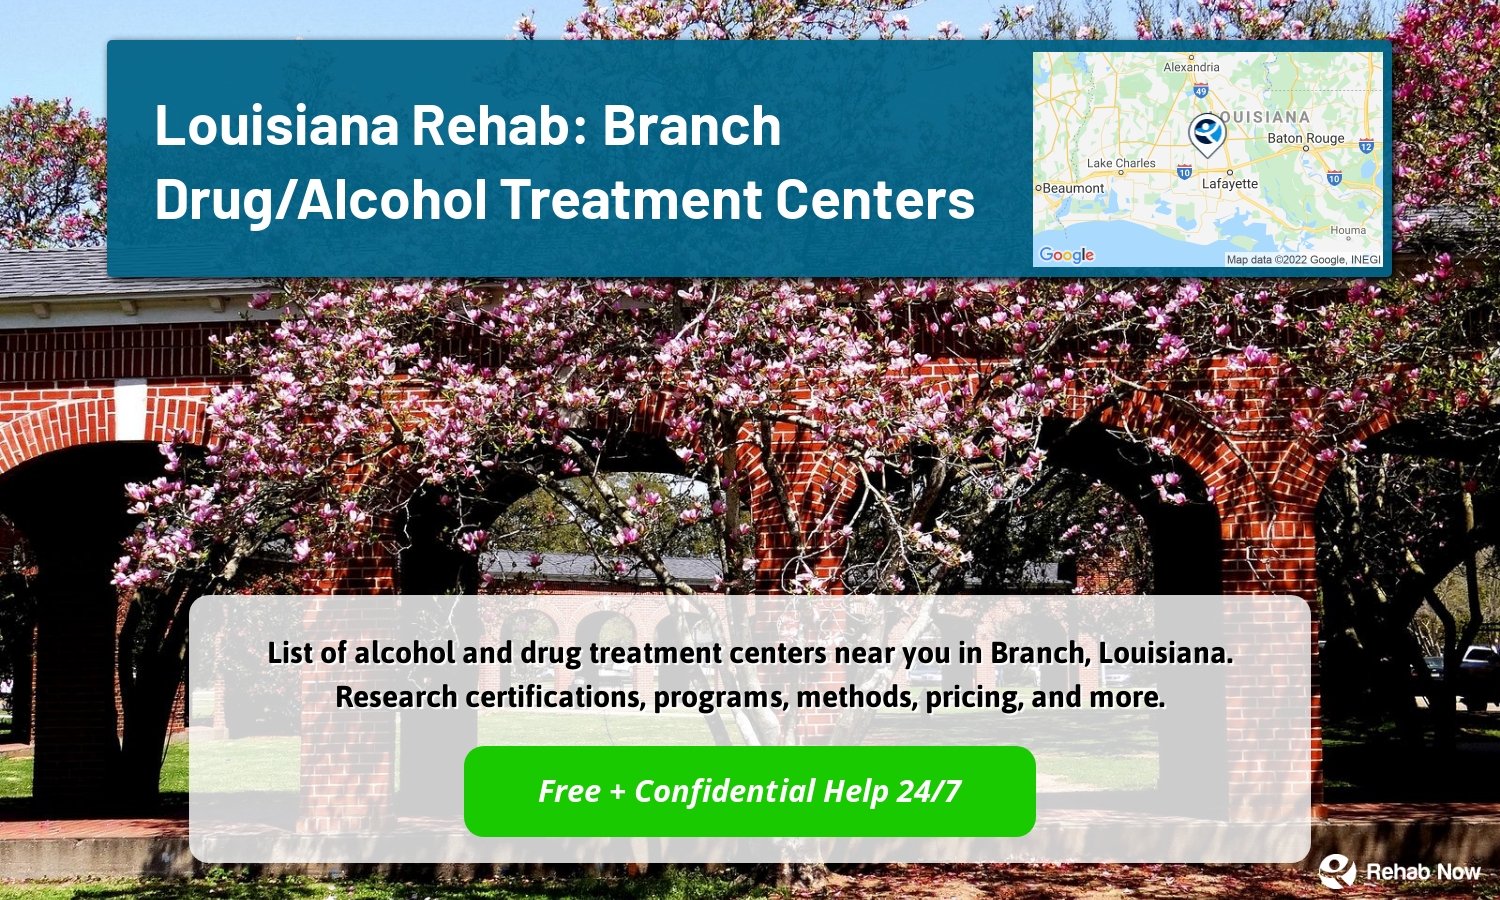 List of alcohol and drug treatment centers near you in Branch, Louisiana. Research certifications, programs, methods, pricing, and more.